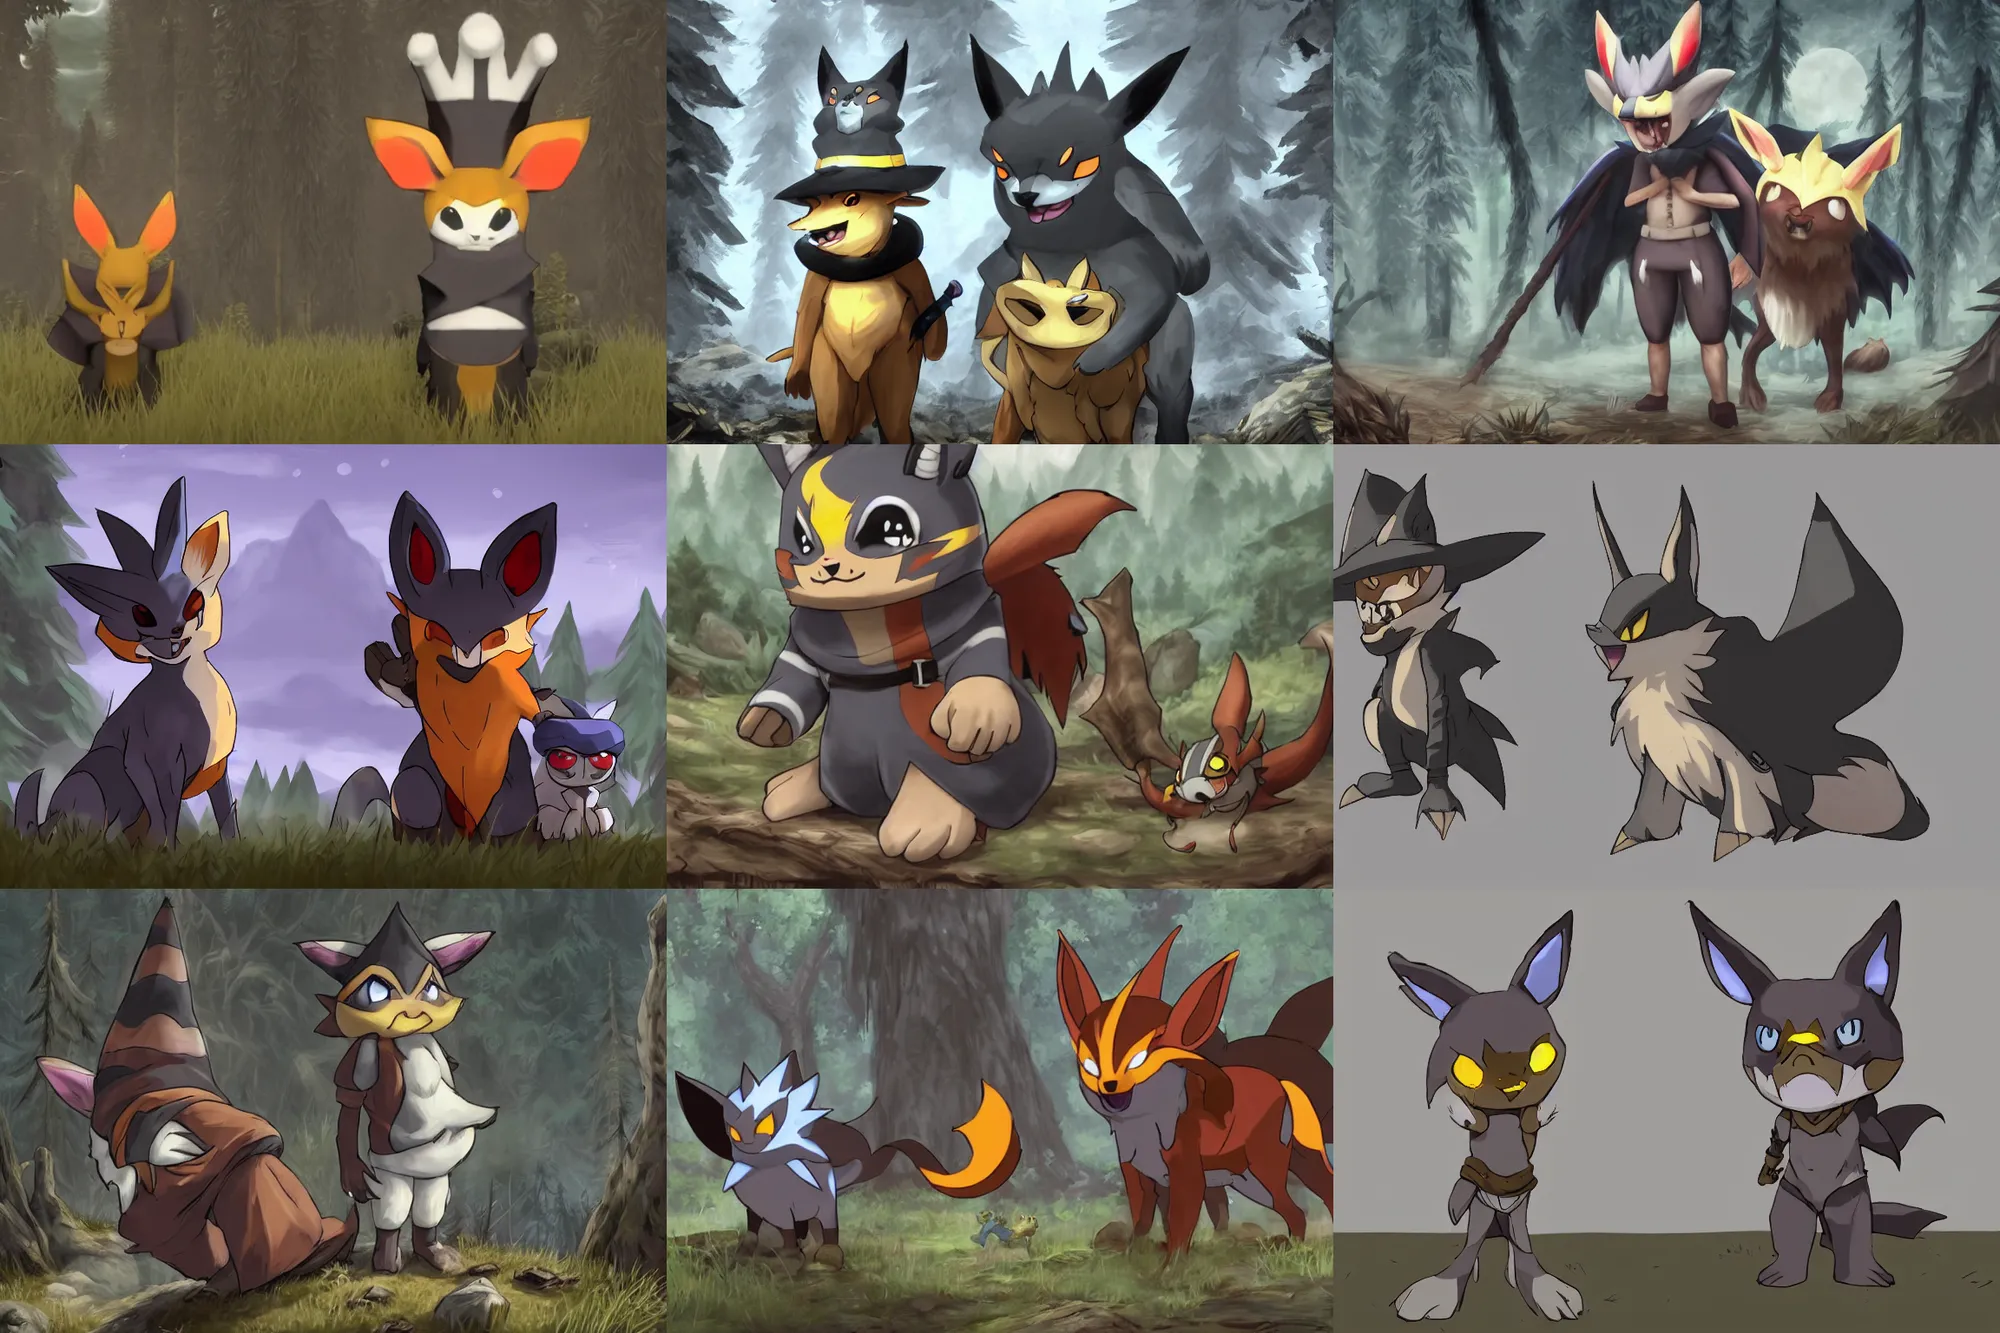 Prompt: trailcam footage grayscale low saturation video game elden clay growlithe : murkrows reprisal star valley resident evil unreal engine mismagius mystery skyrim dungeon ultrahd resident eevee wearing bandanna standing in front of giratina, maidenless wearing witch hat pokemon nextgen